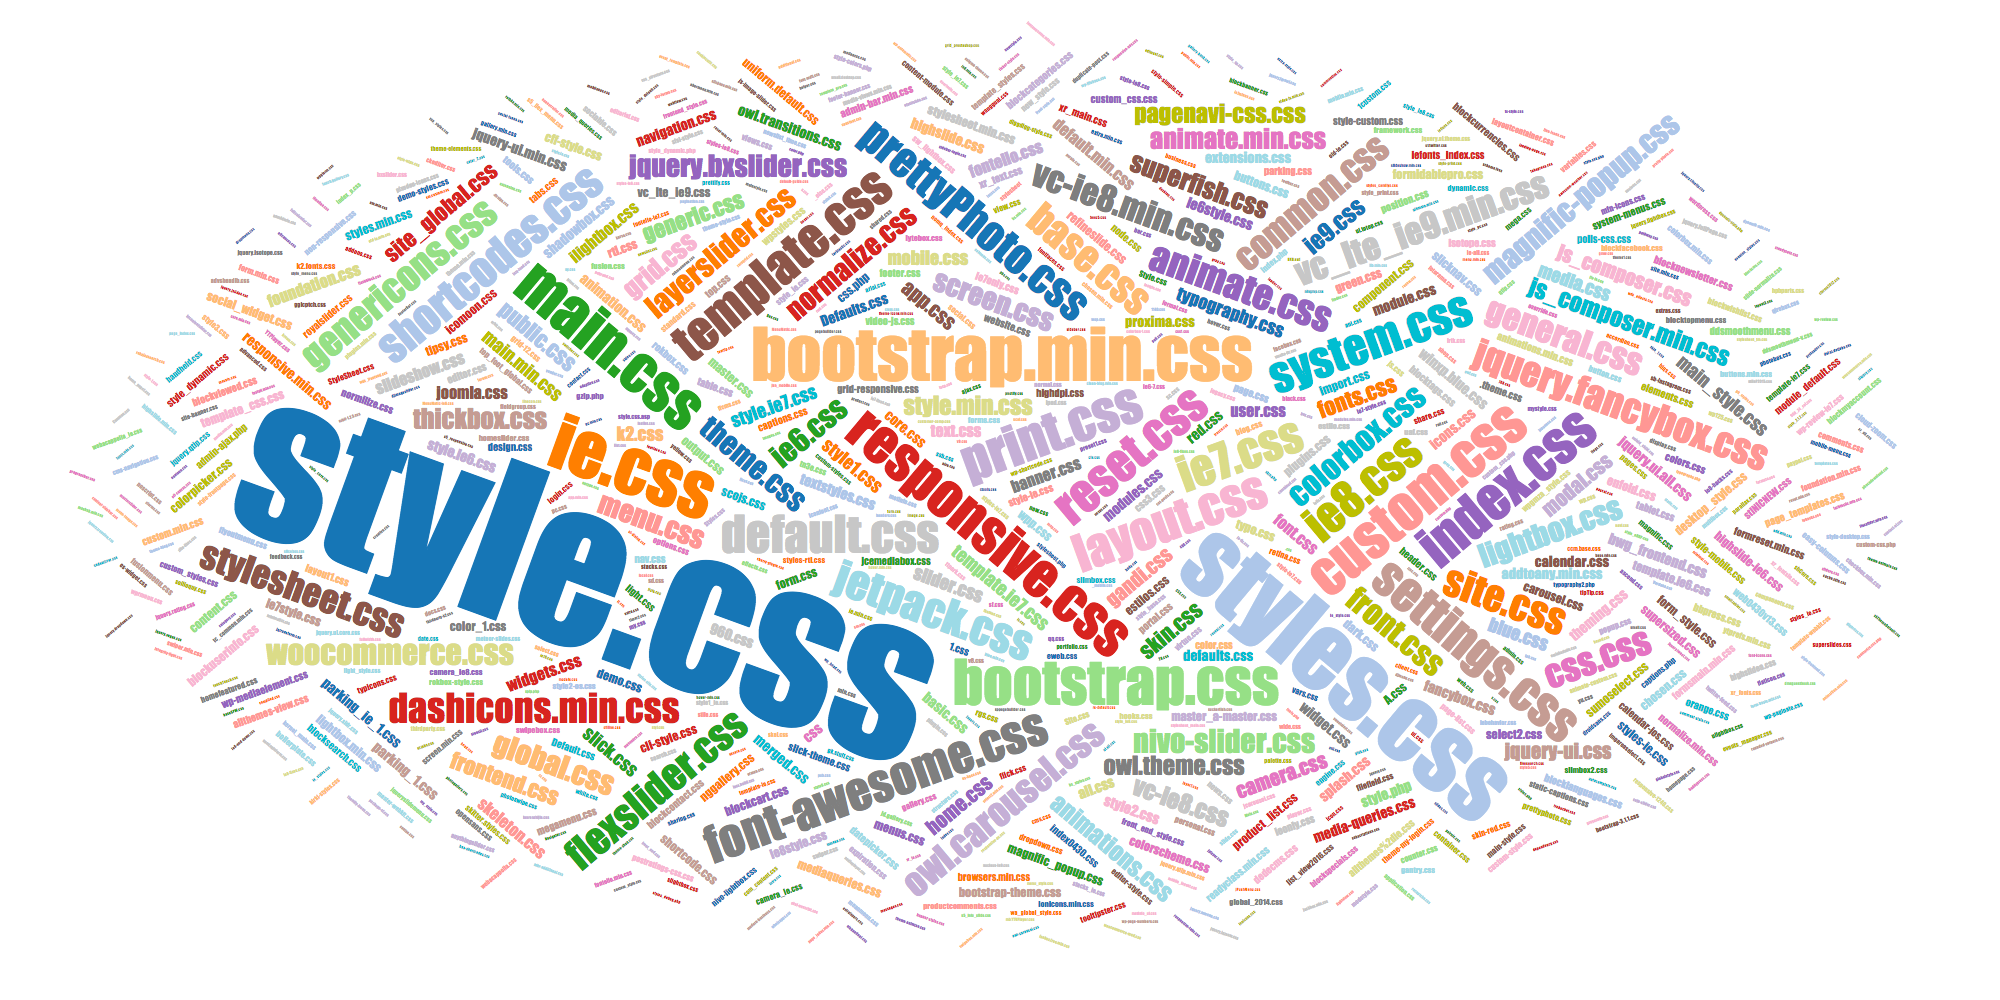 Popular names of CSS files font-awesome.min.css, font-awesome.css, etc.